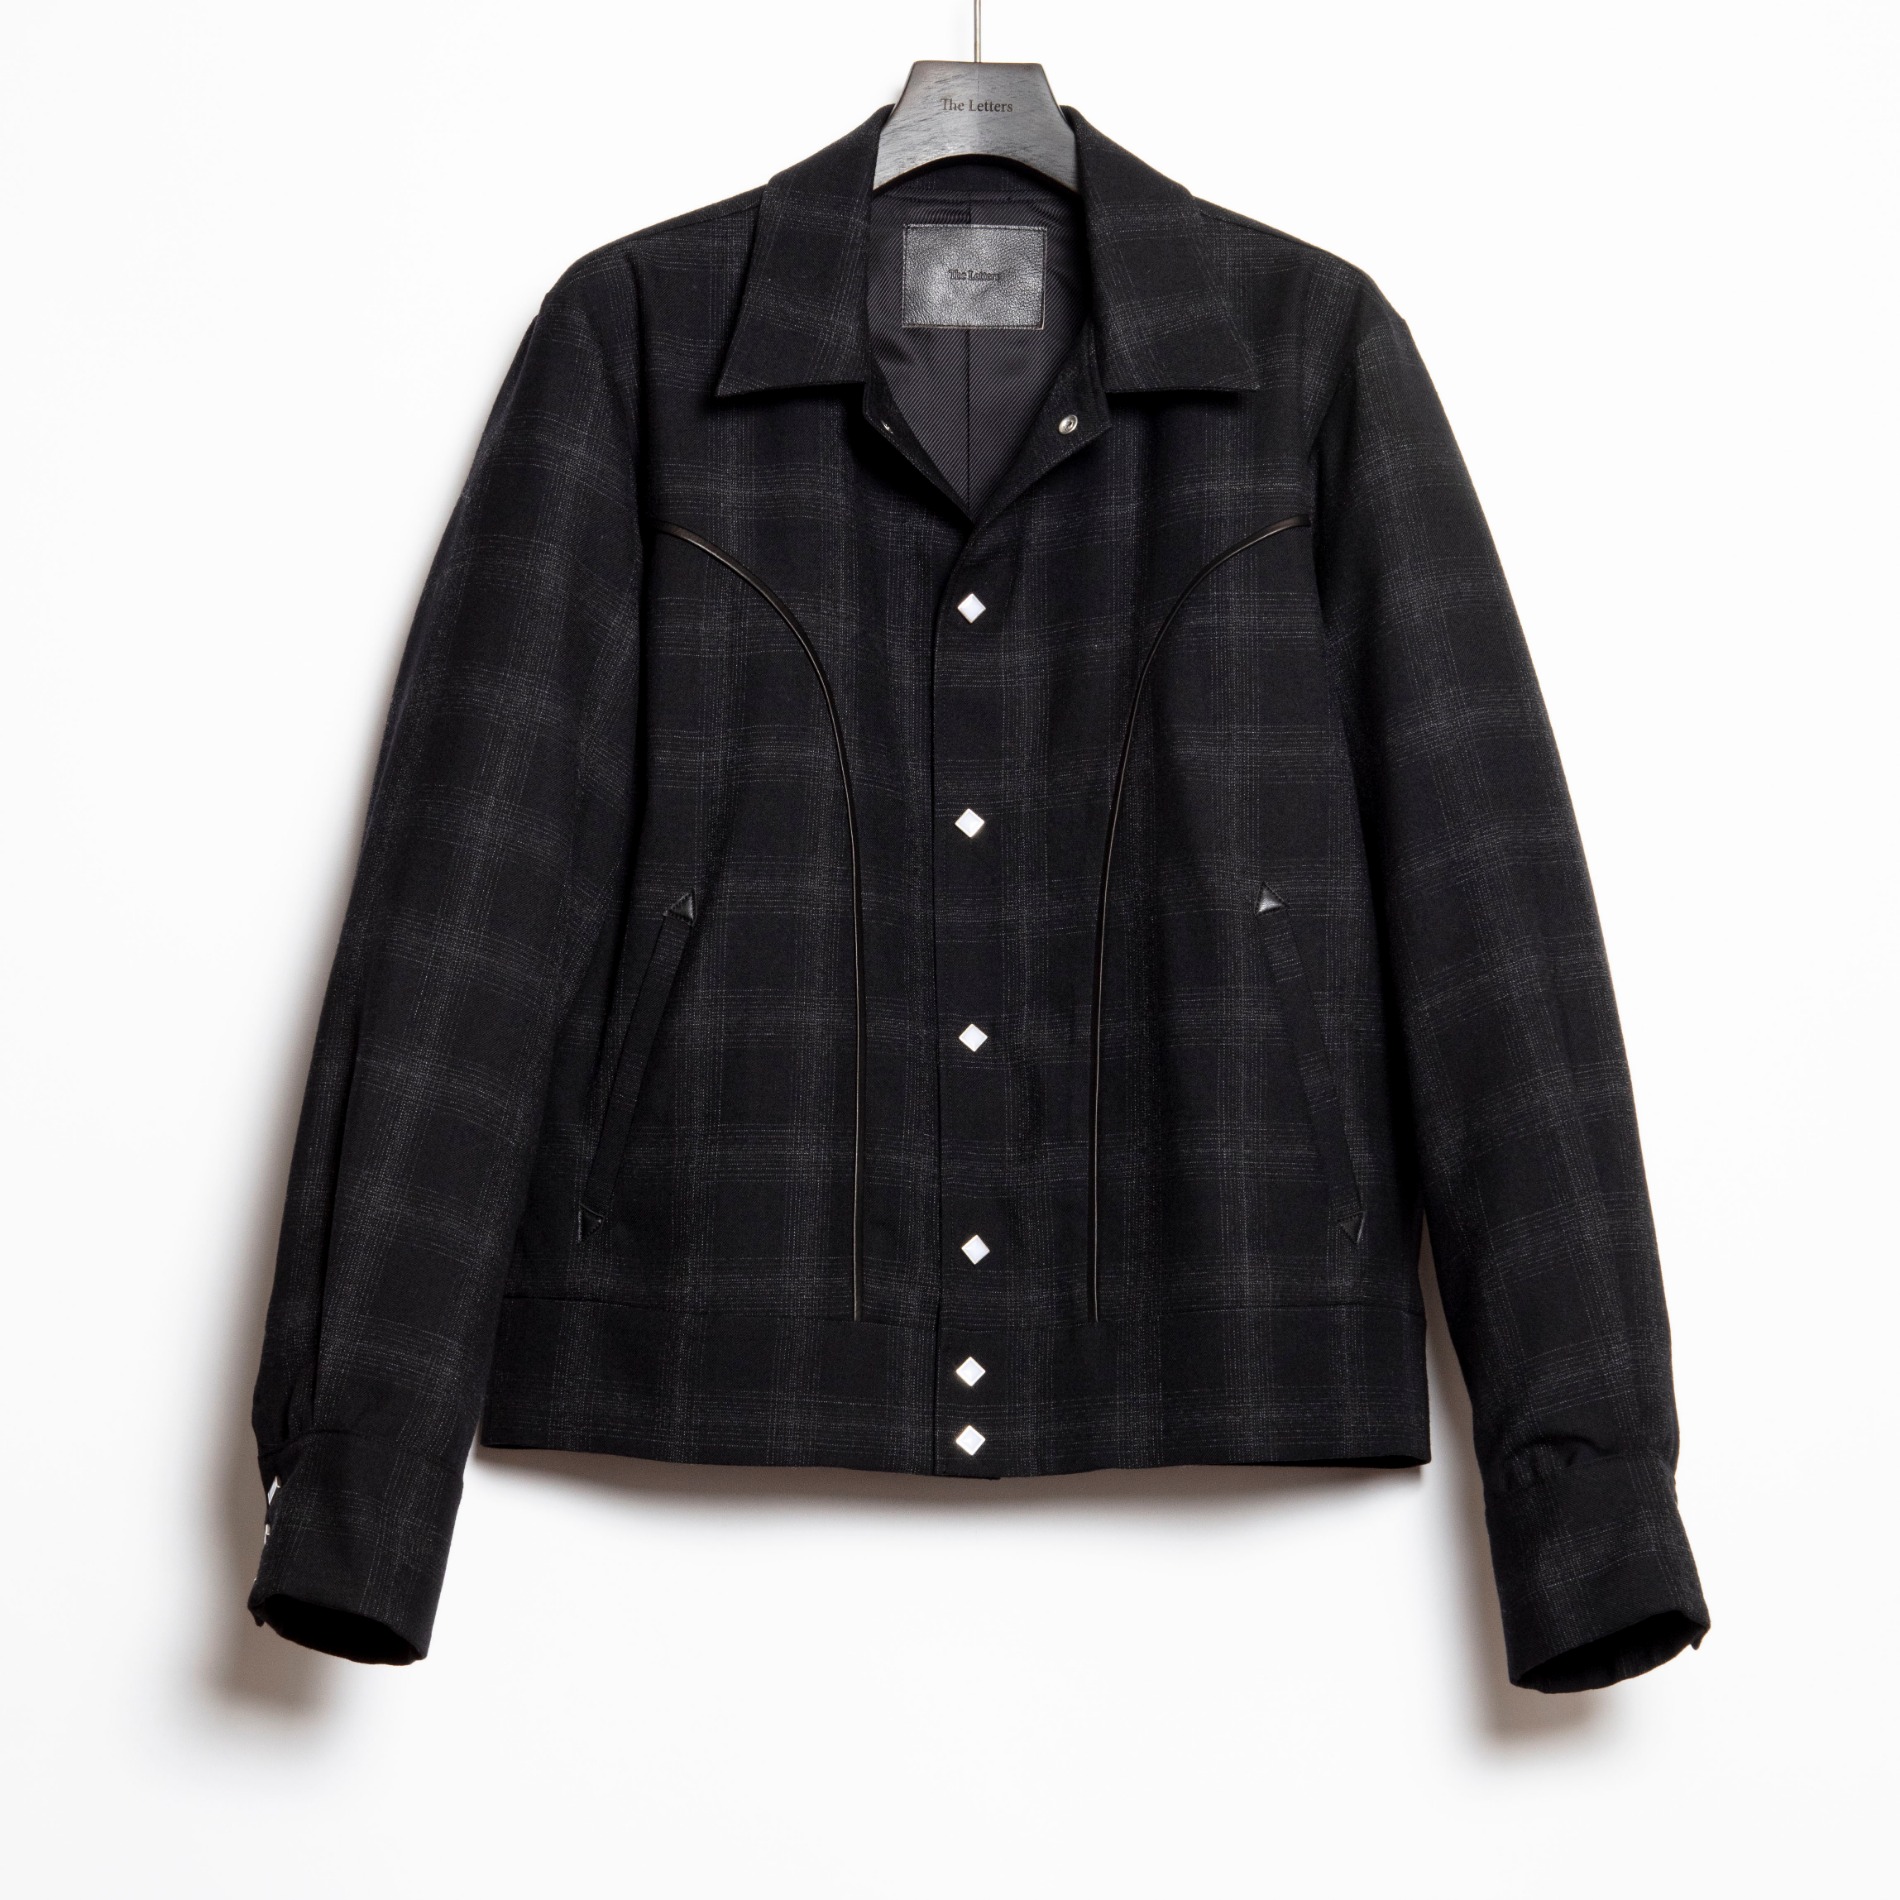 THE LETTERS WESTERN BOLERO JACKET OMBRE CHECK WOOL BLACK